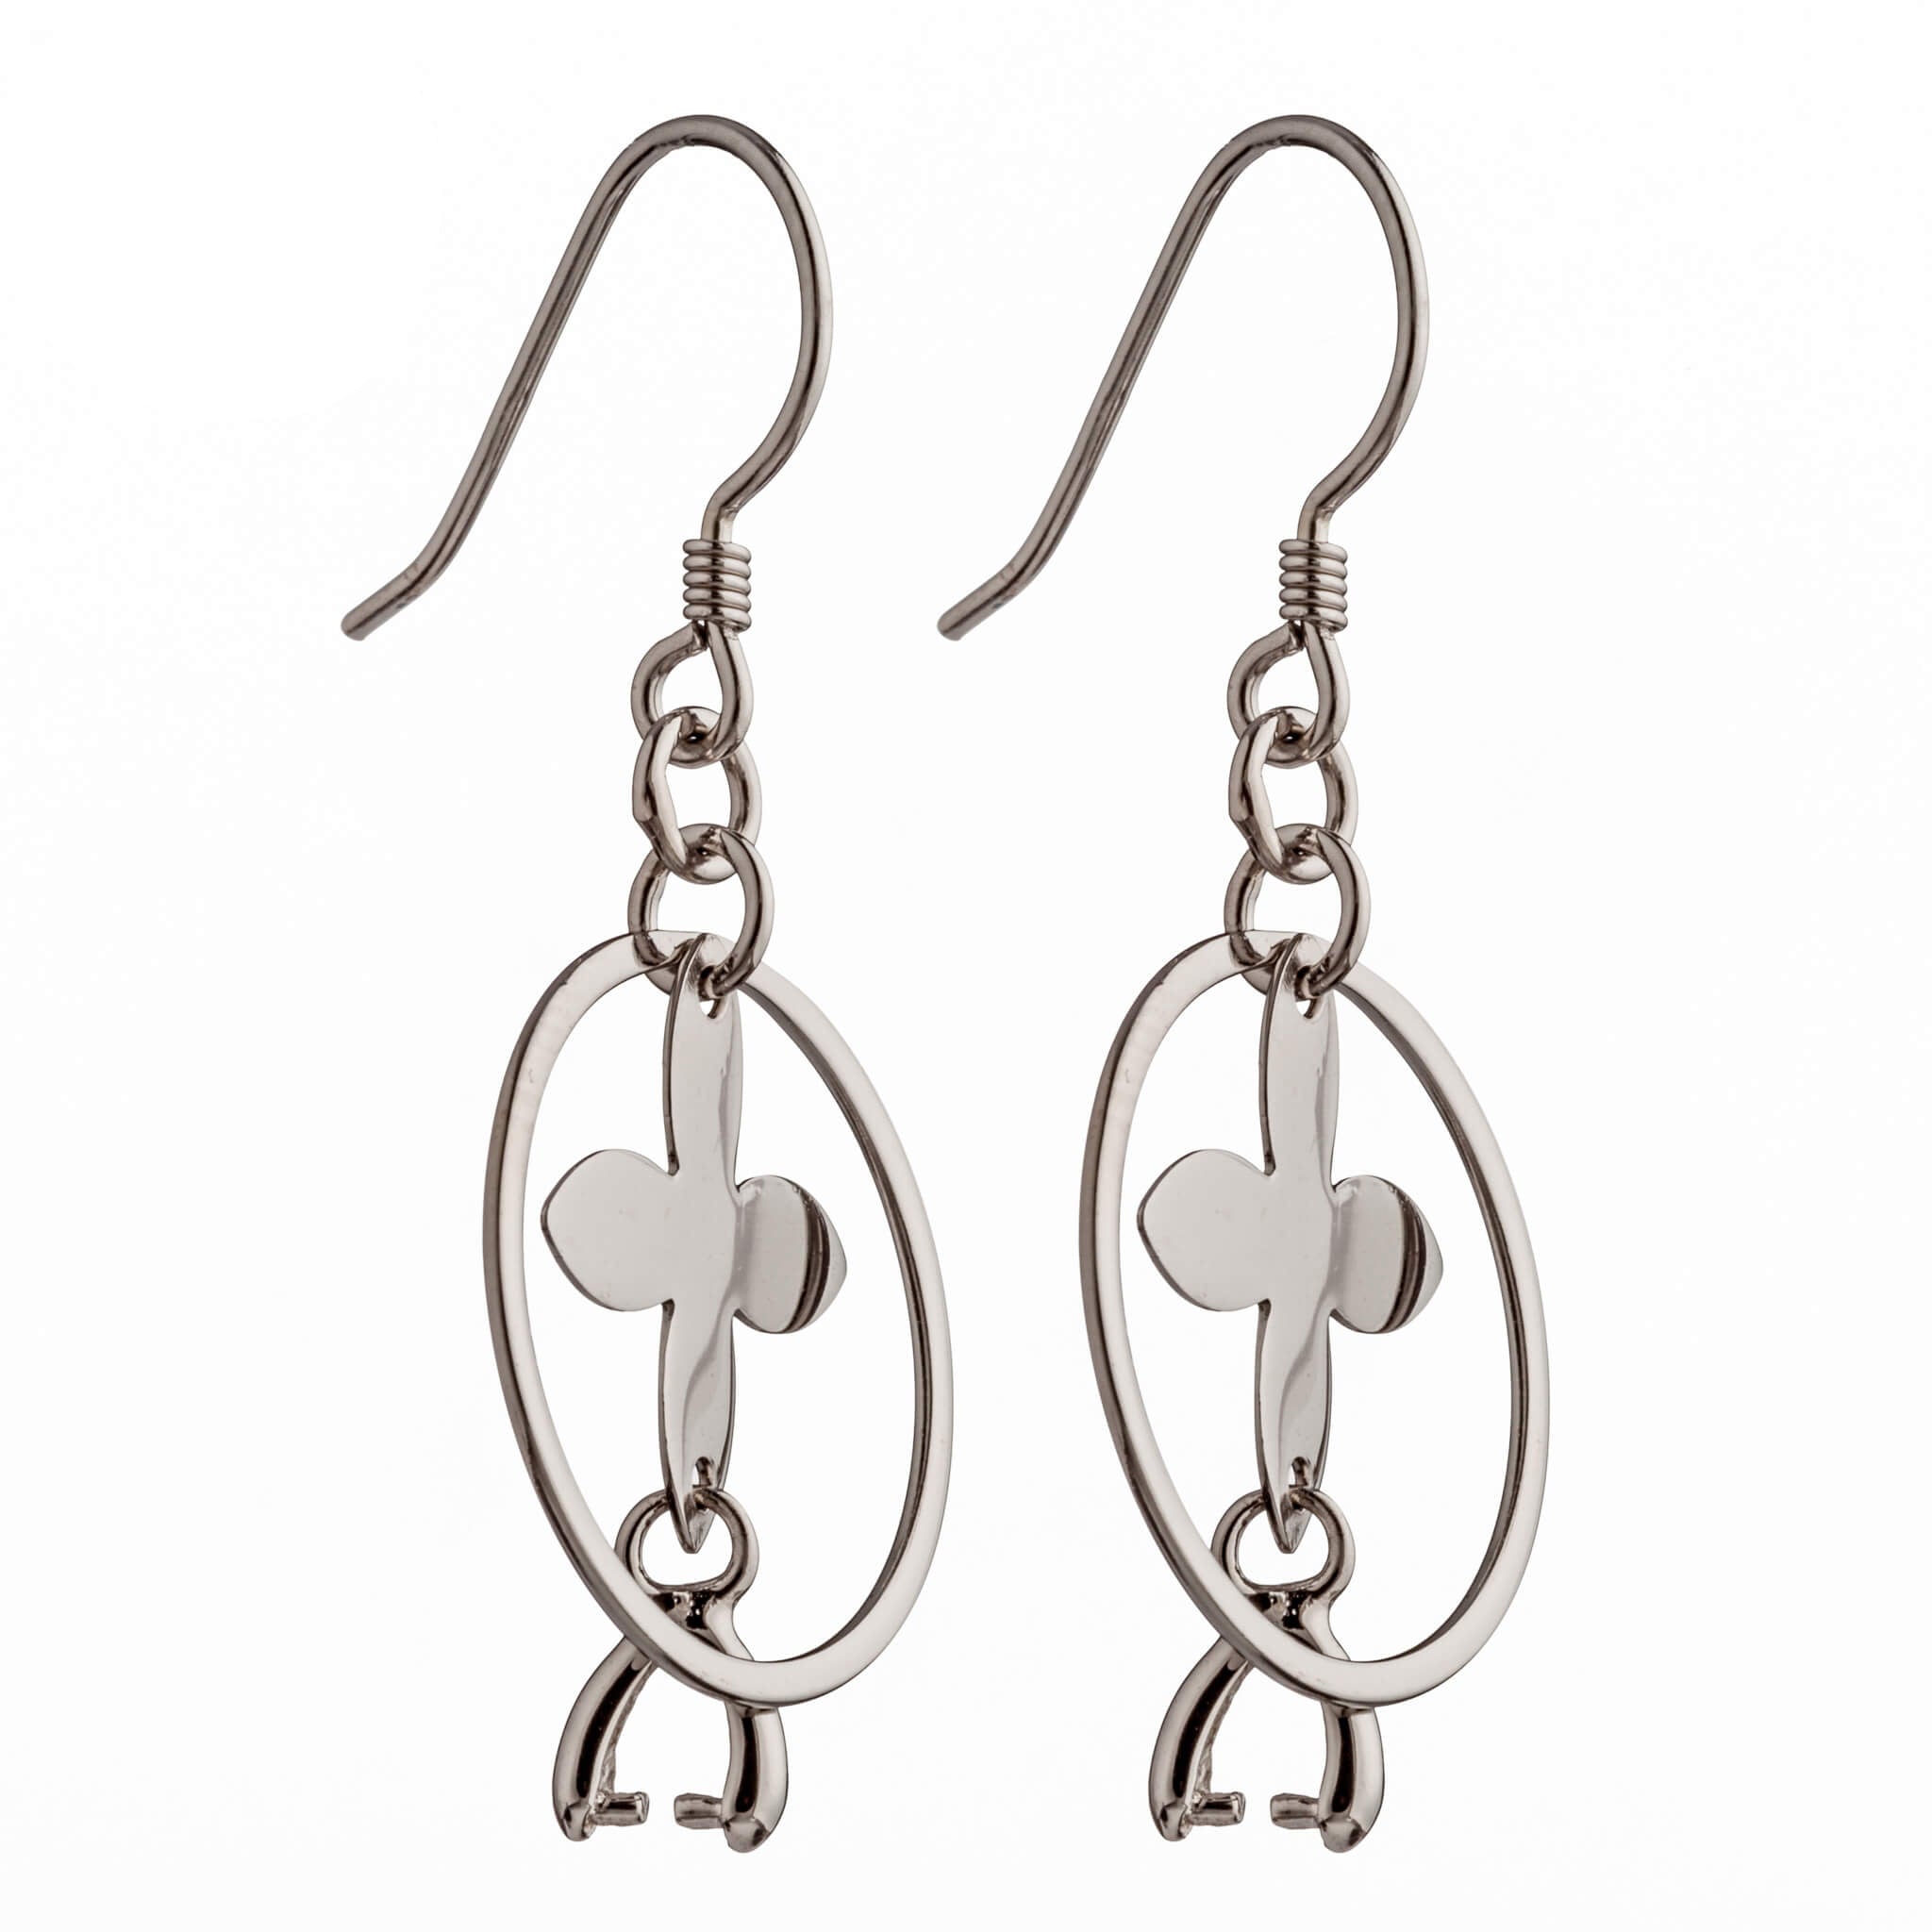 Ear Wires with Earring Components and Pinch Bail Mounting in Sterling Silver